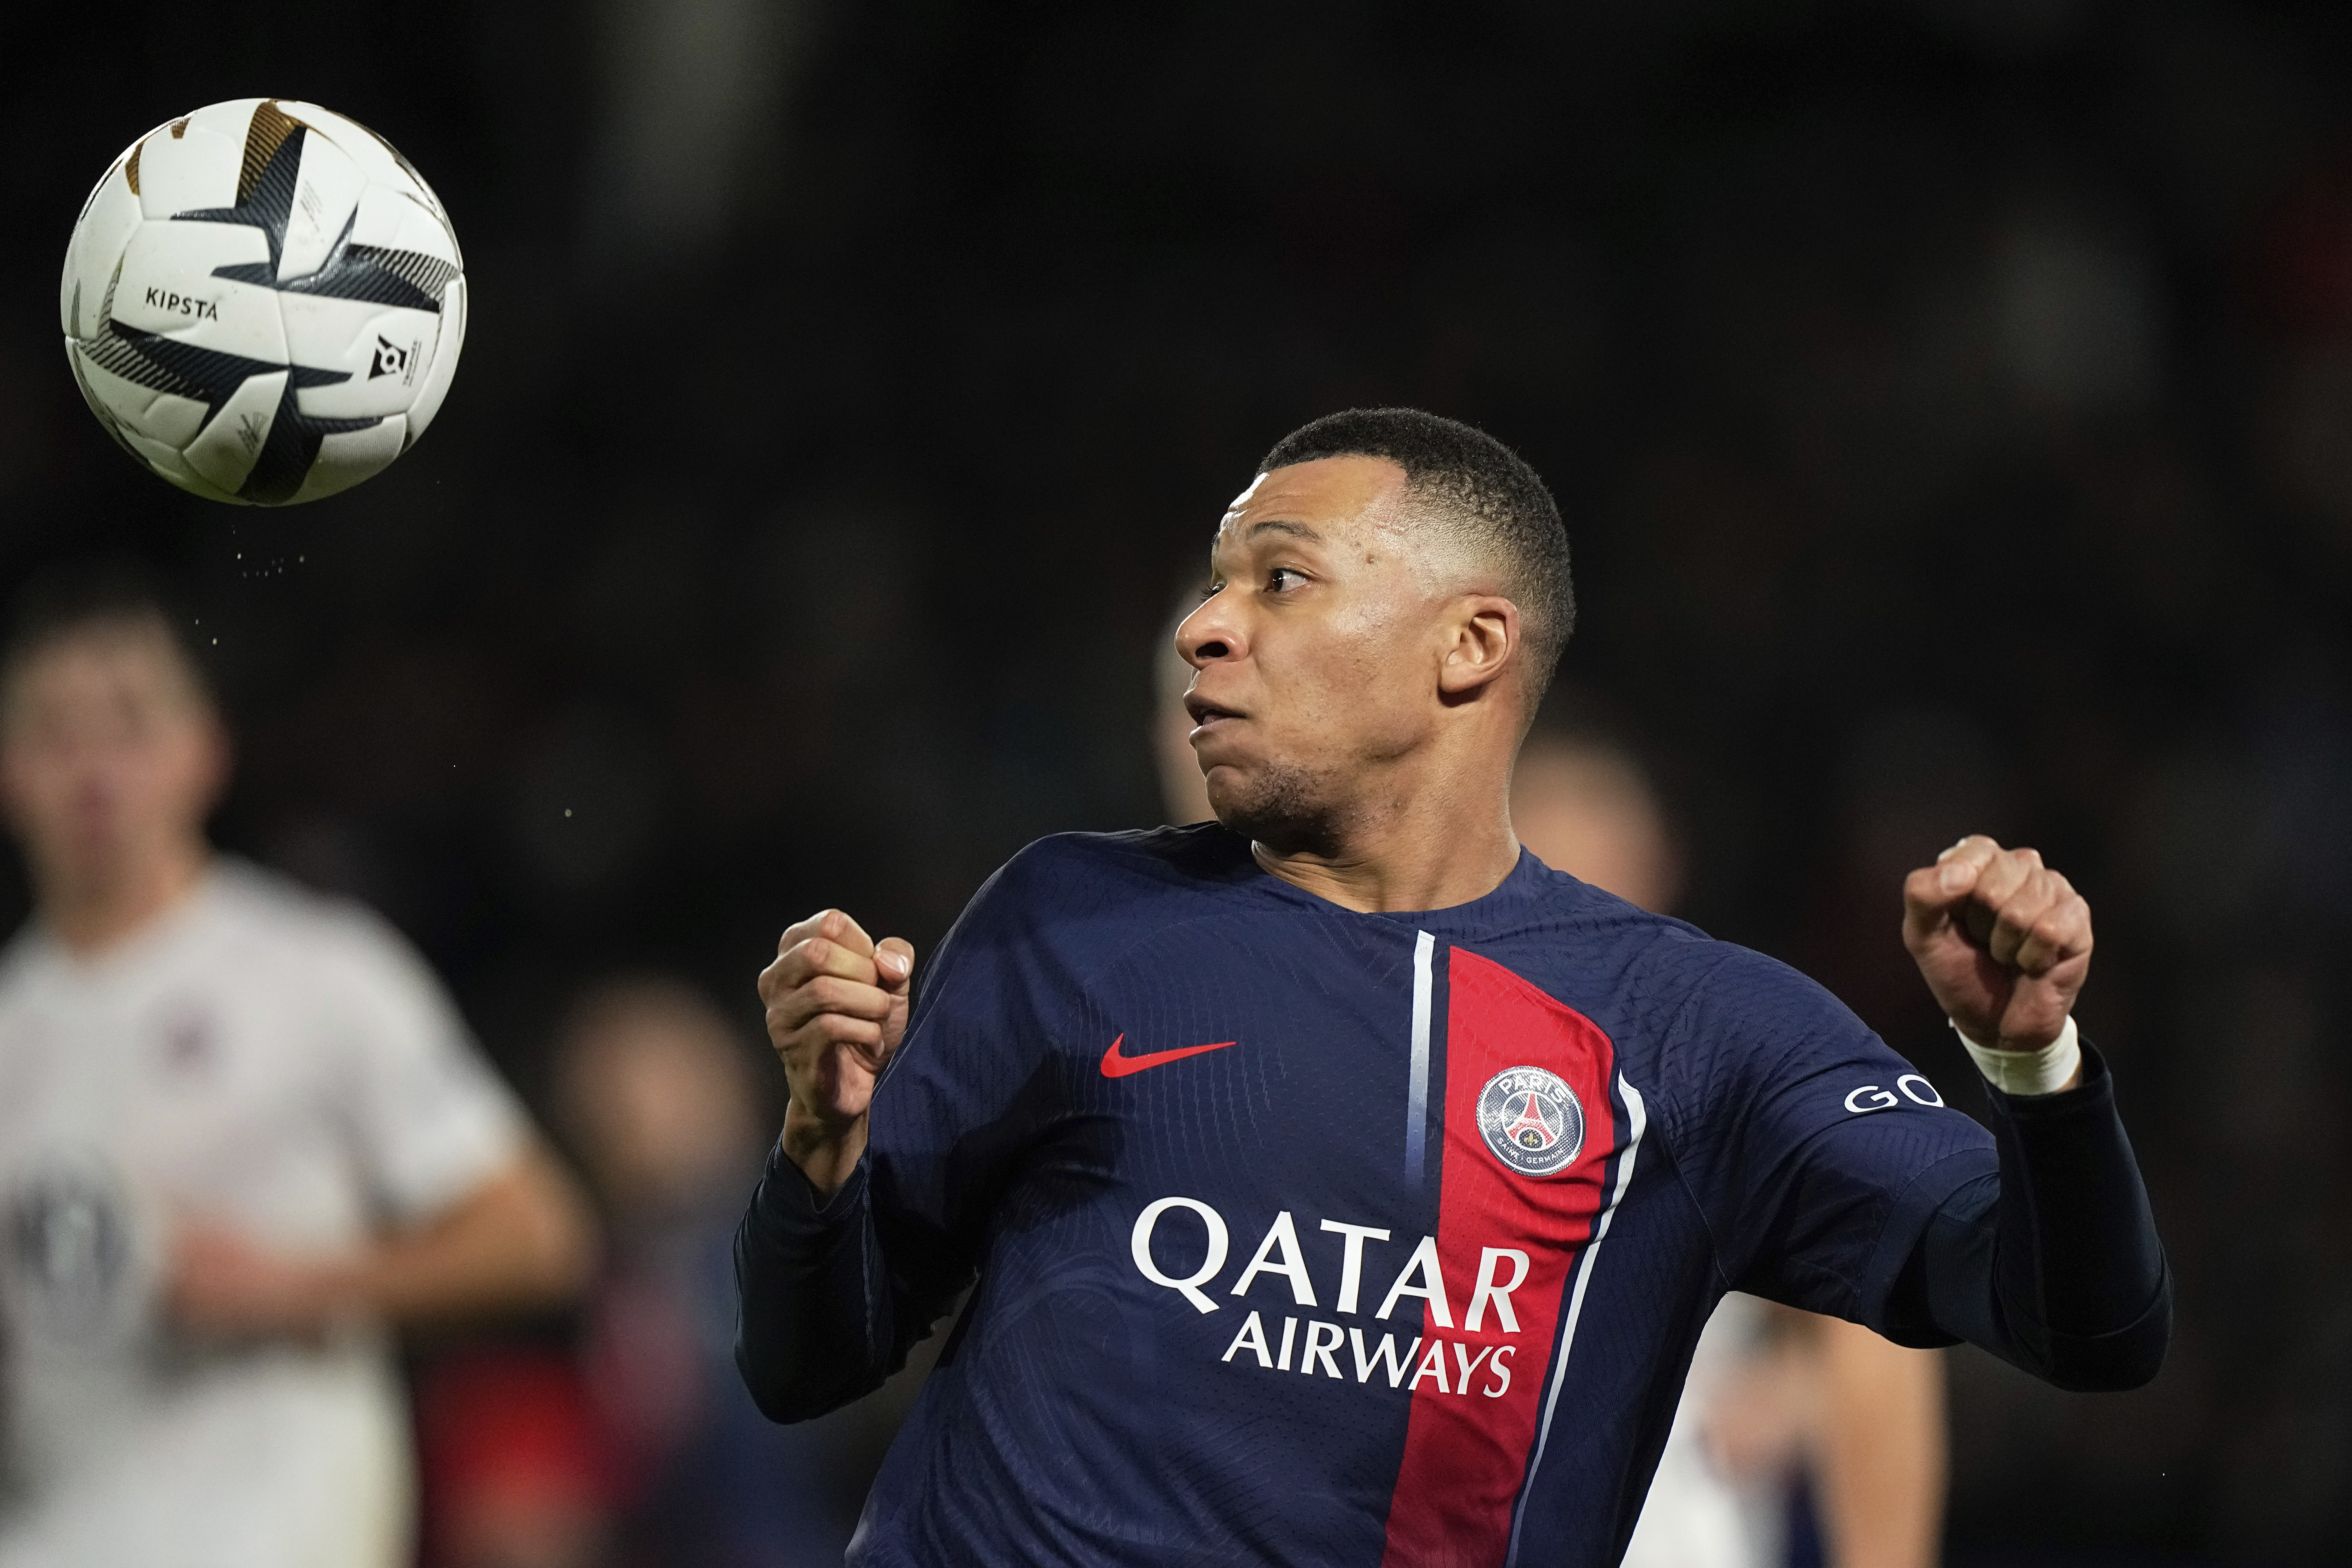 PSG gives Kylian Mbappé 2 weeks to decide on his future: 'We want